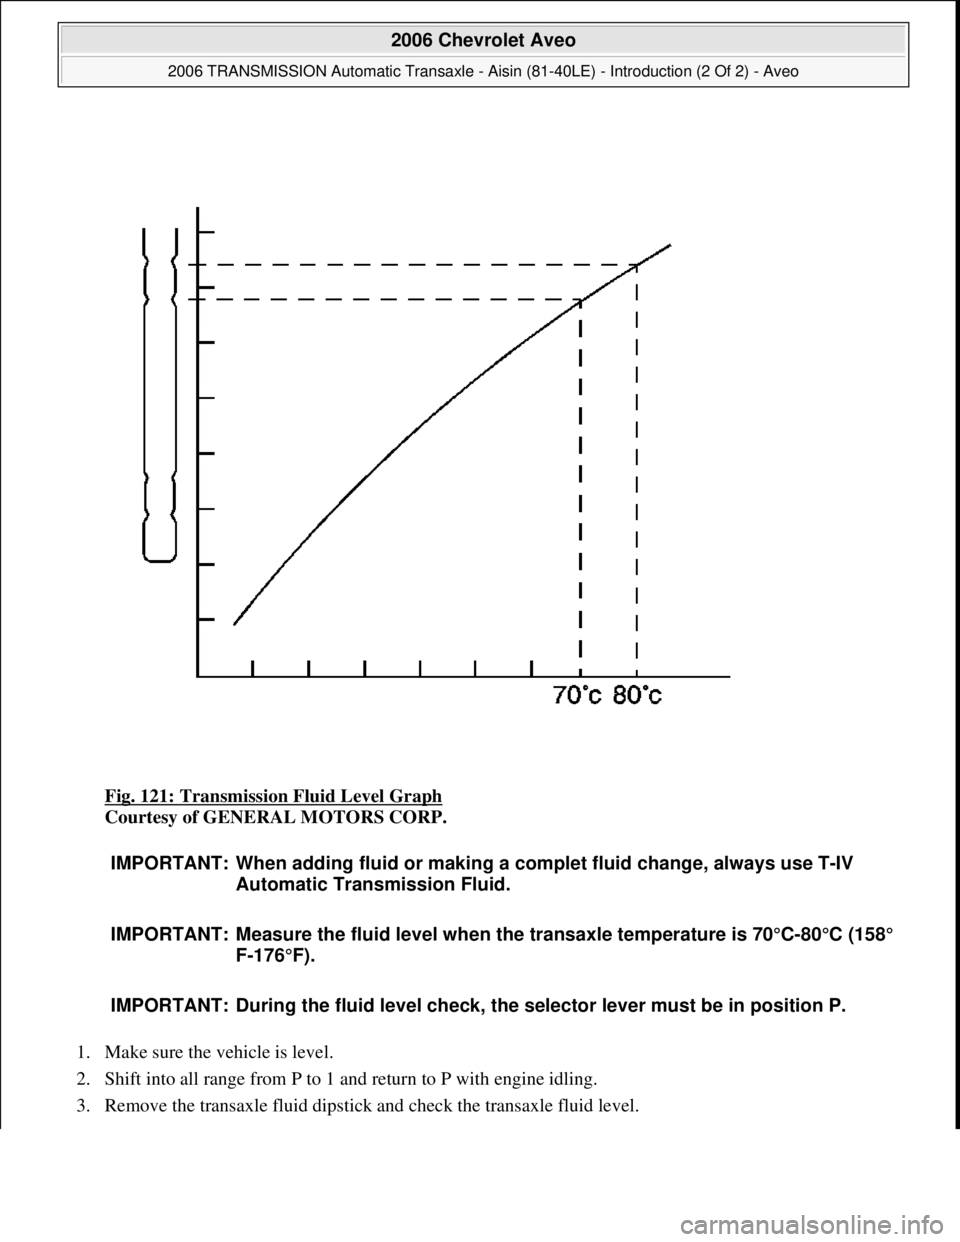 CHEVROLET AVEO 2002  Service Repair Manual Fig. 121: Transmission Fluid Level Graph 
Courtesy of GENERAL MOTORS CORP. 
1. Make sure the vehicle is level.  
2. Shift into all range from P to 1 and return to P with engine idling.  
3. Remove the